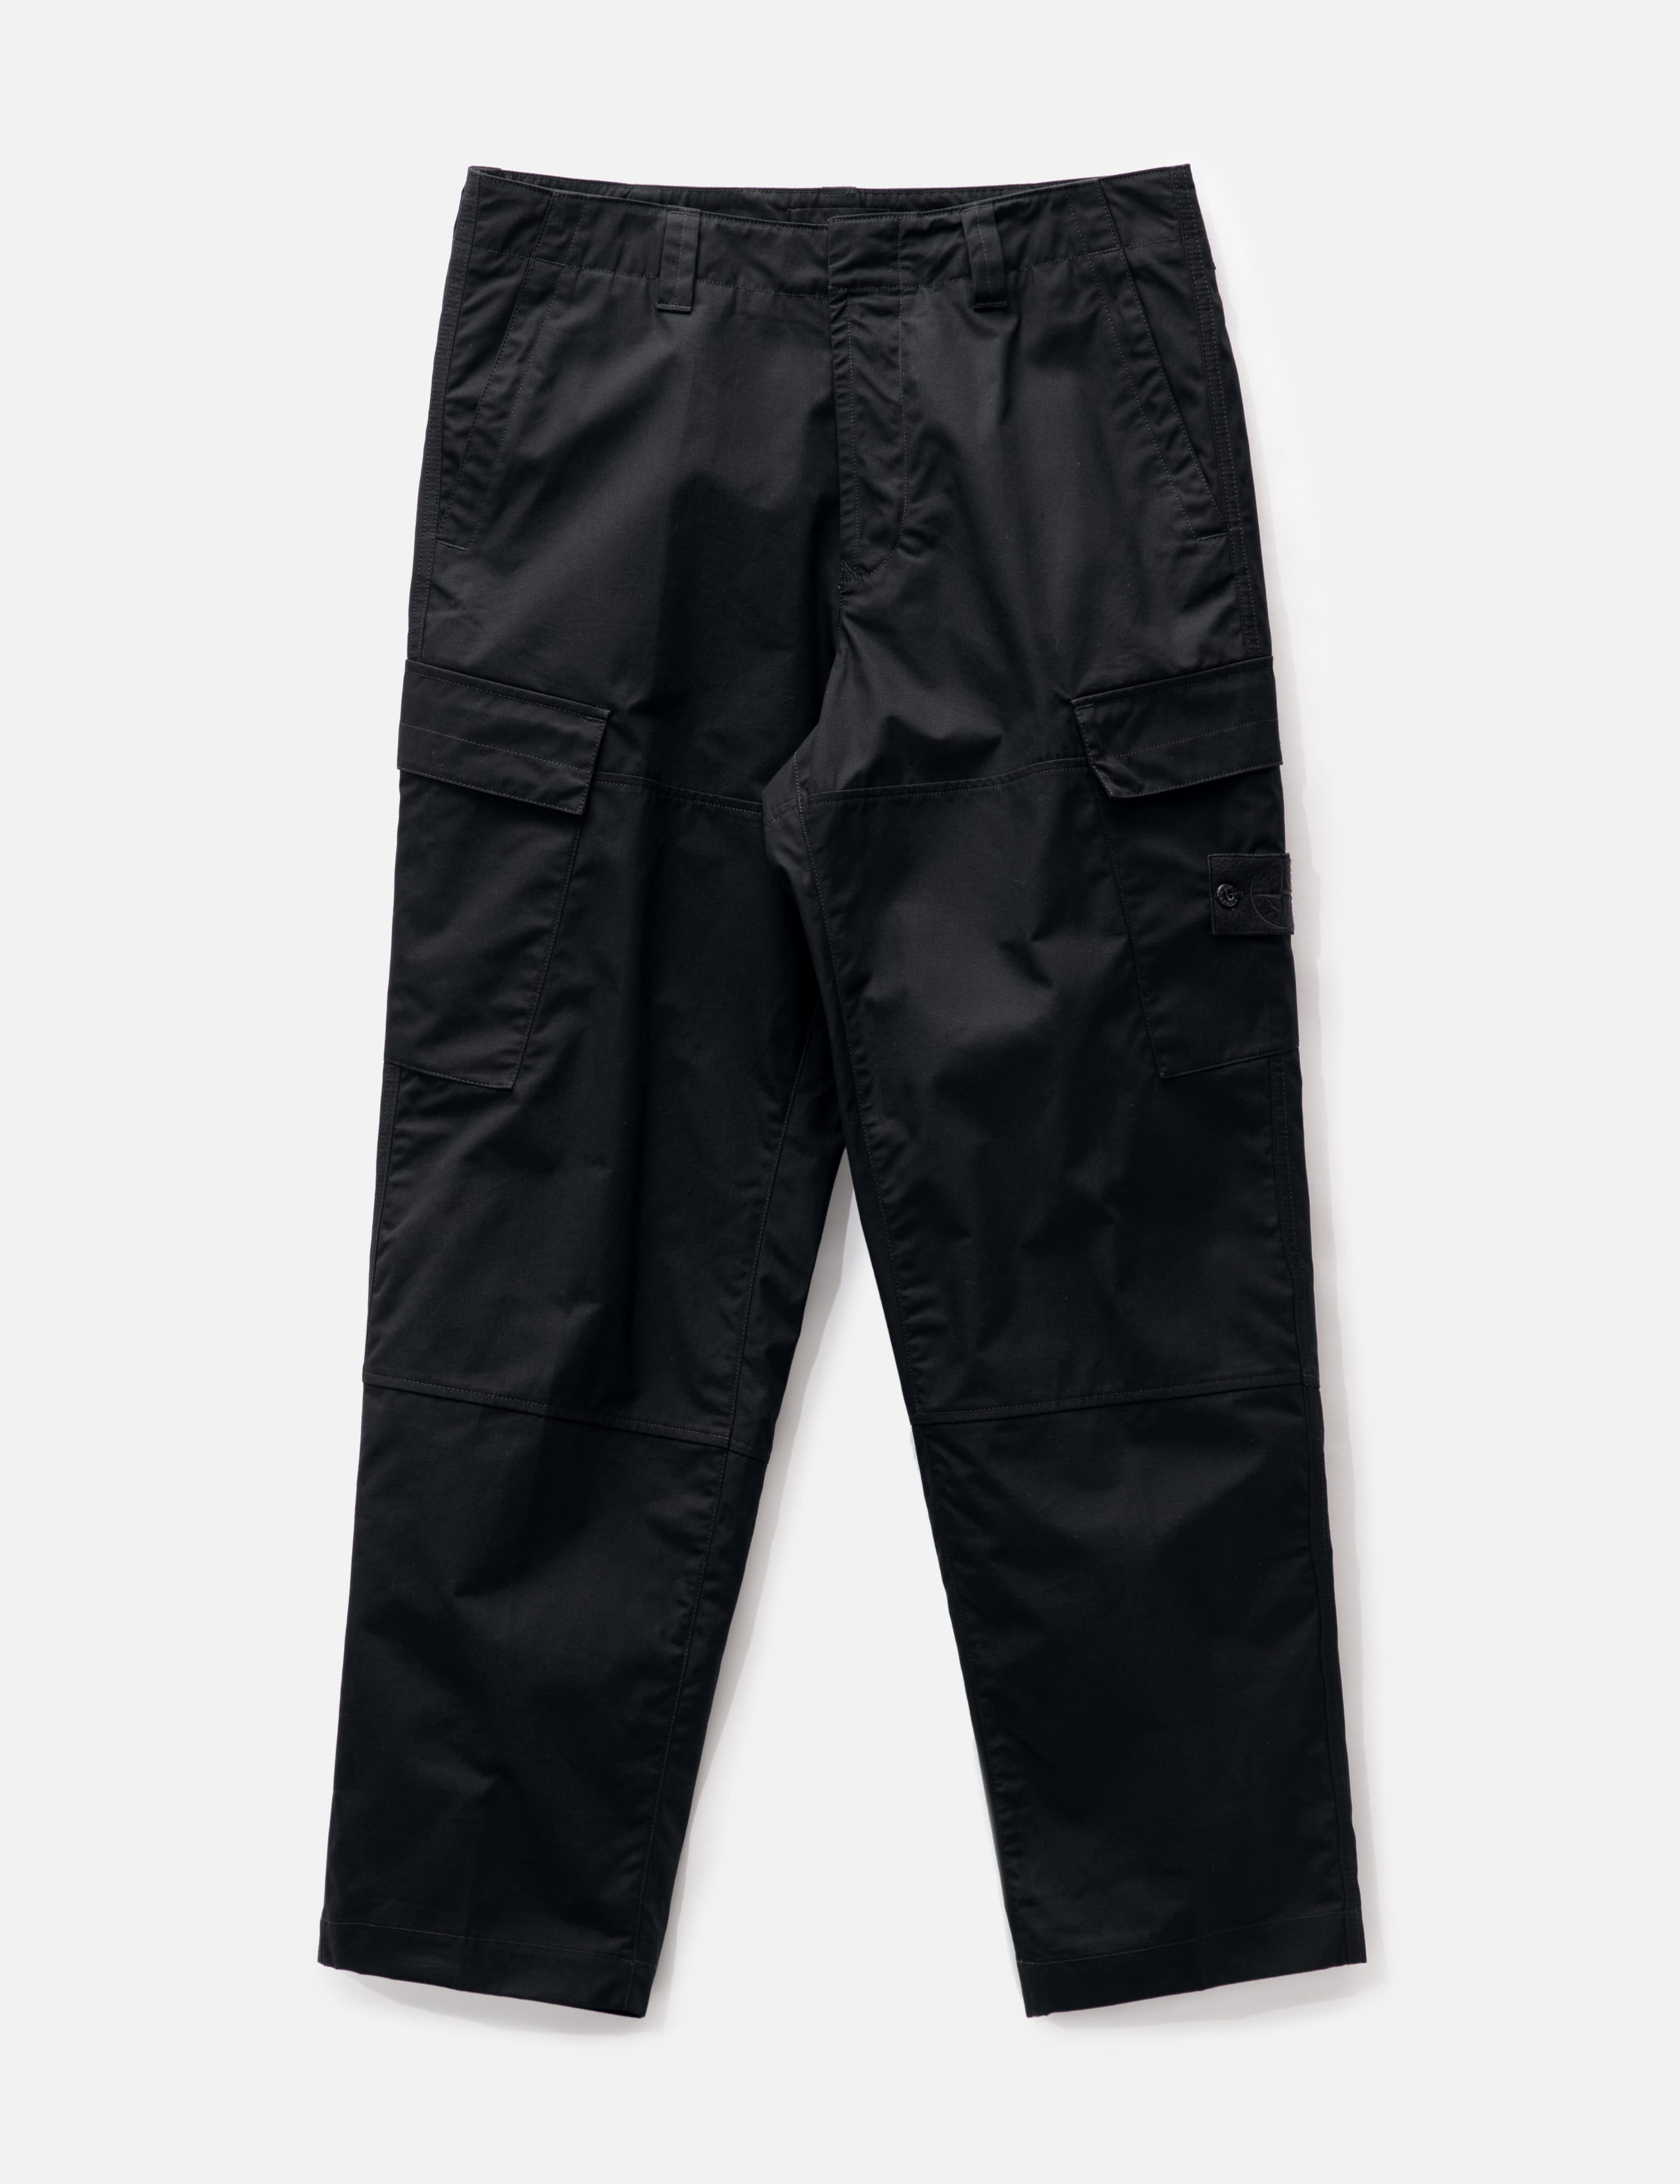 Stone Island - Ghost Piece Cargo Pants | HBX - Globally Curated